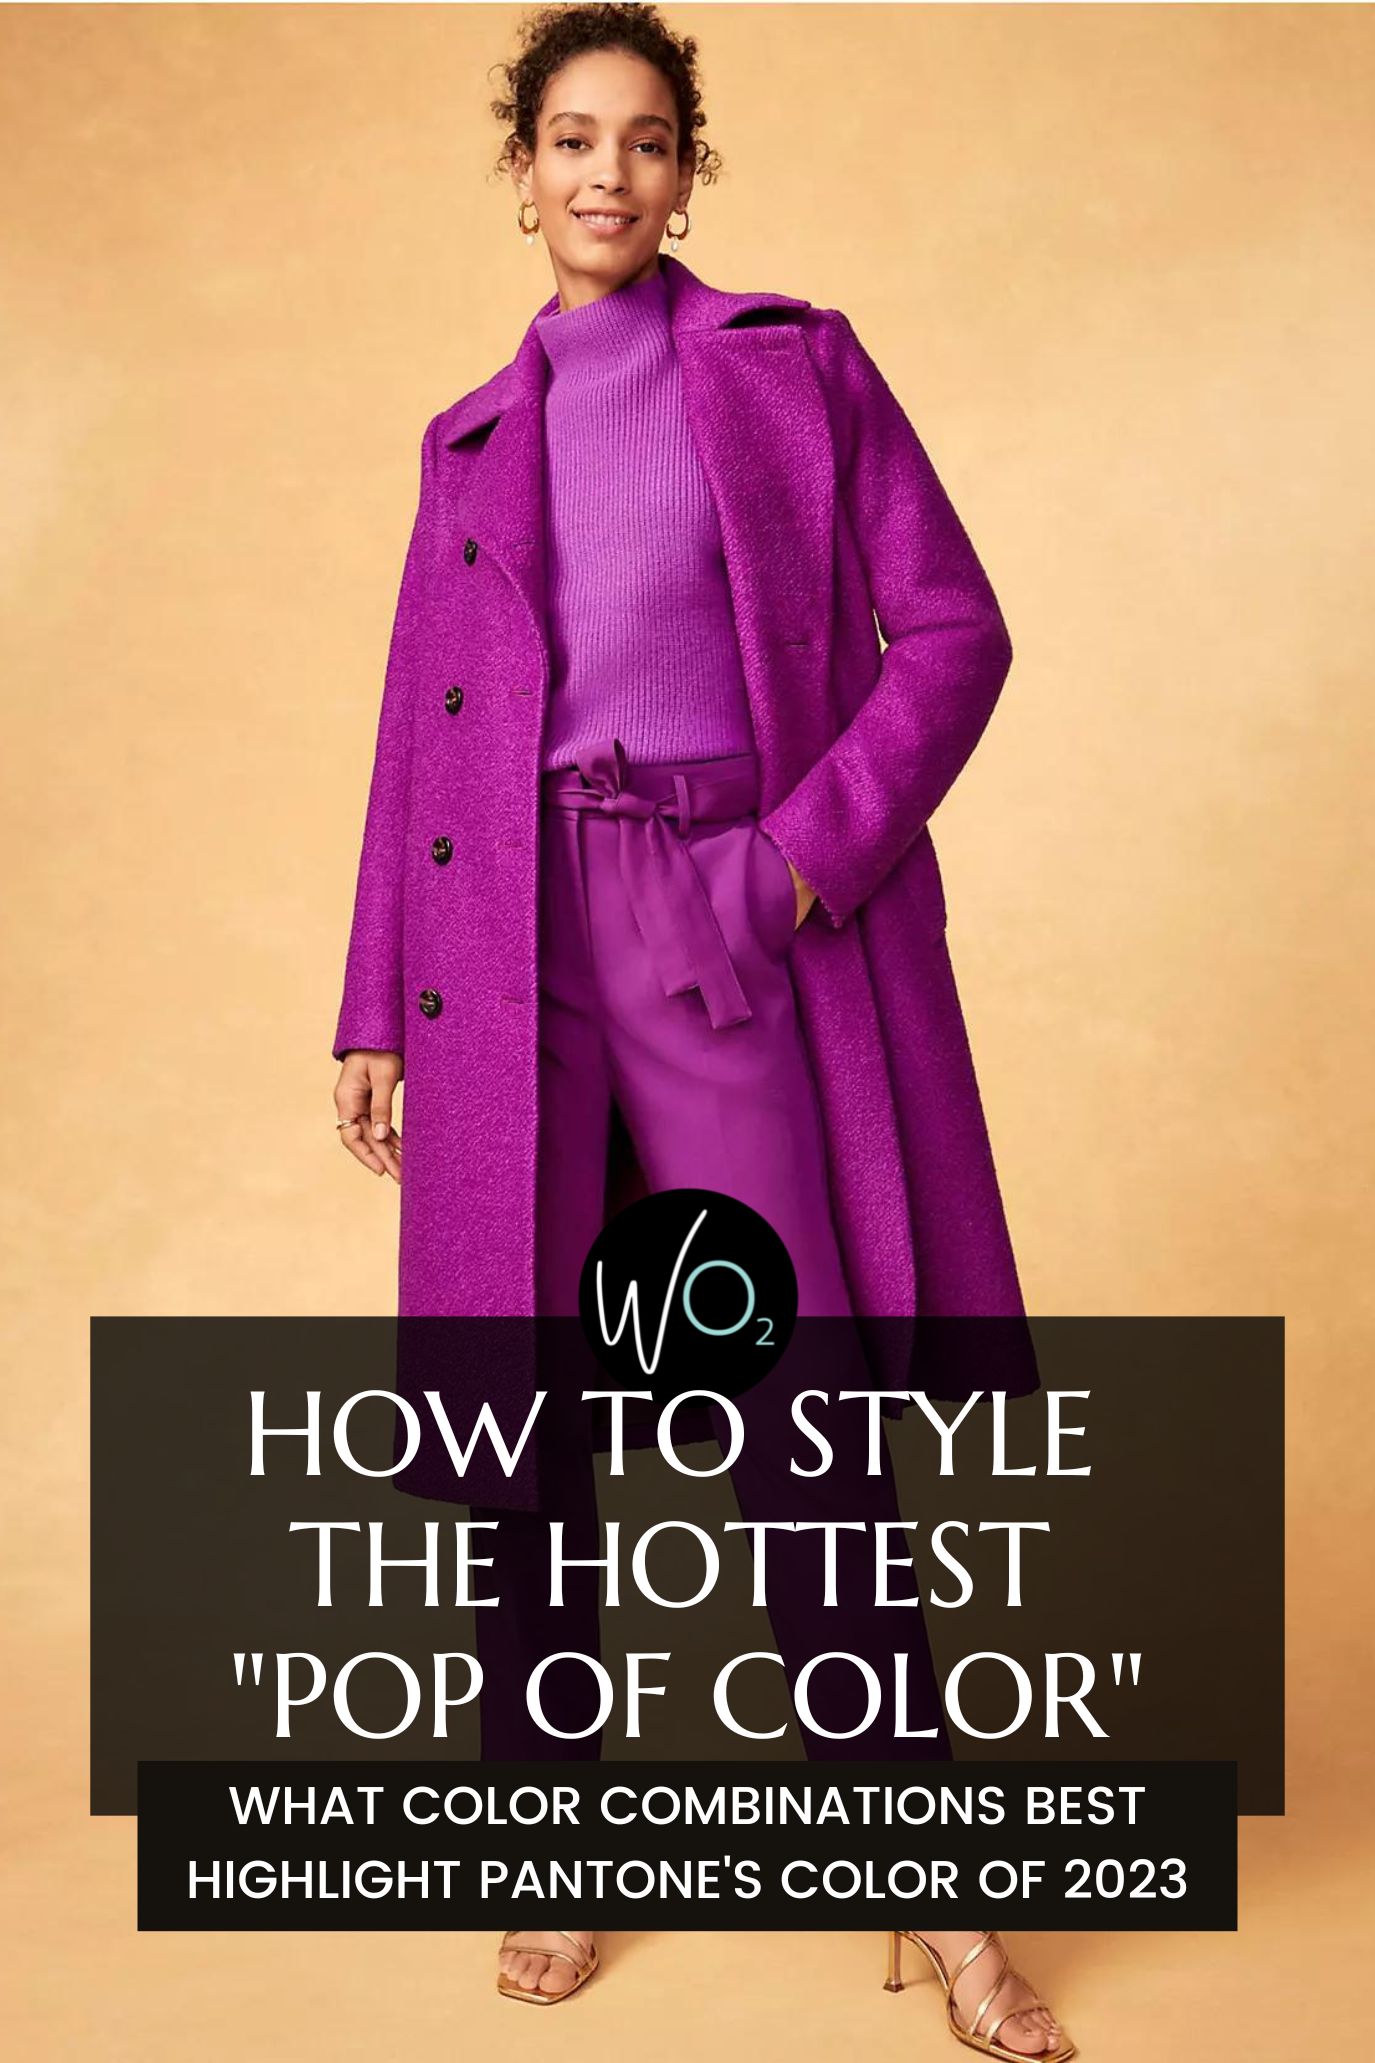 How to Rock the New Pop of Color: Fuchsia, Magenta, and Berry Tones